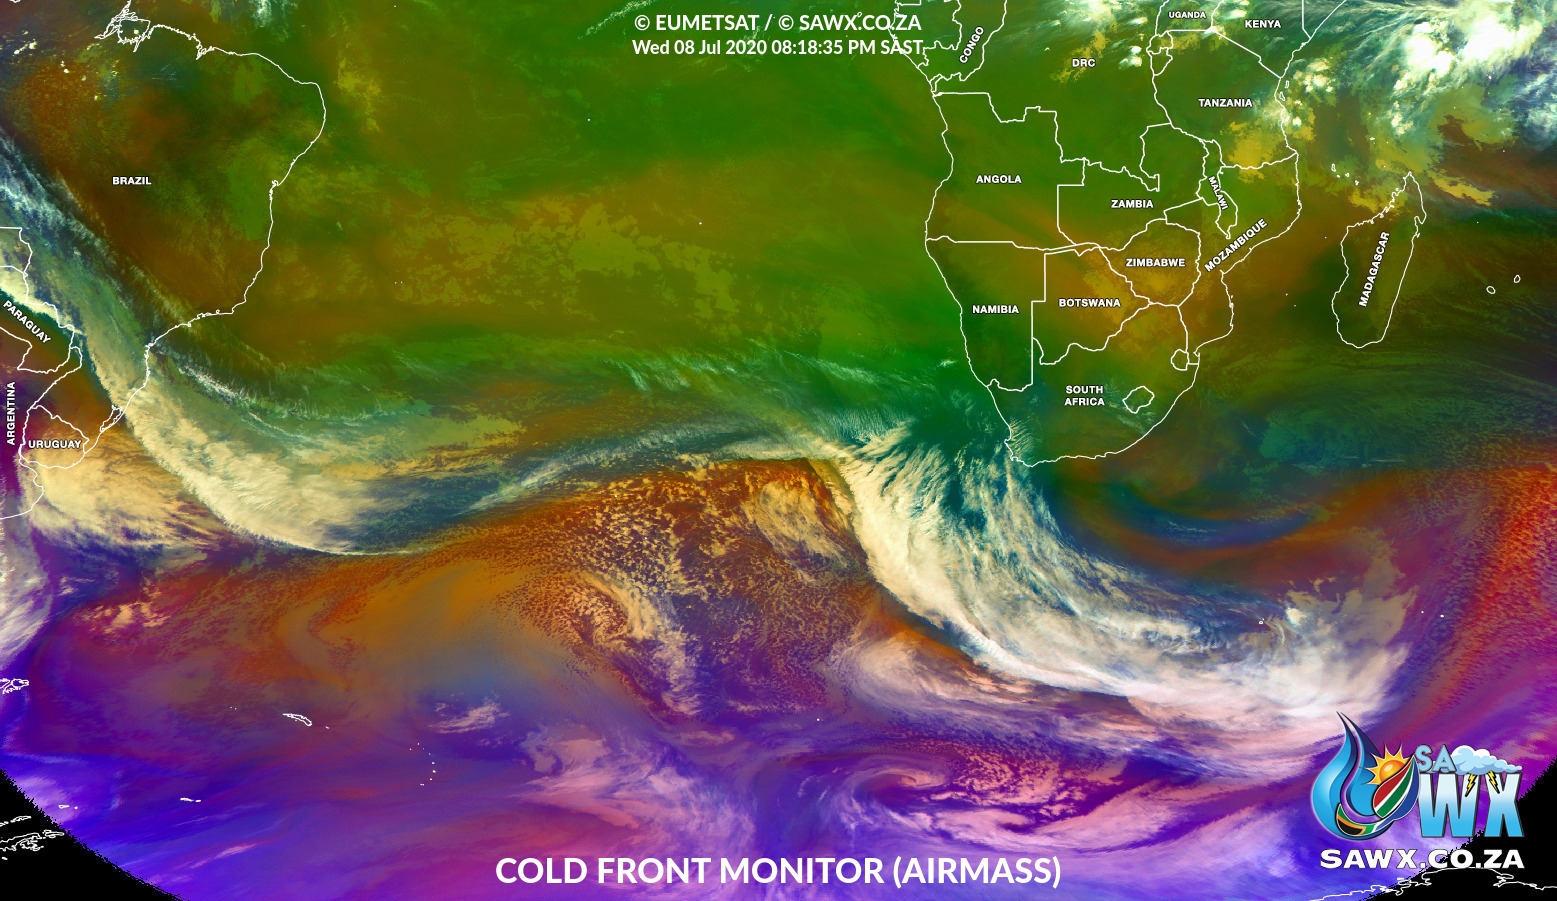 3 Cold Fronts to hit South Africa - Lesotho to see heaviest snowfall of all 17